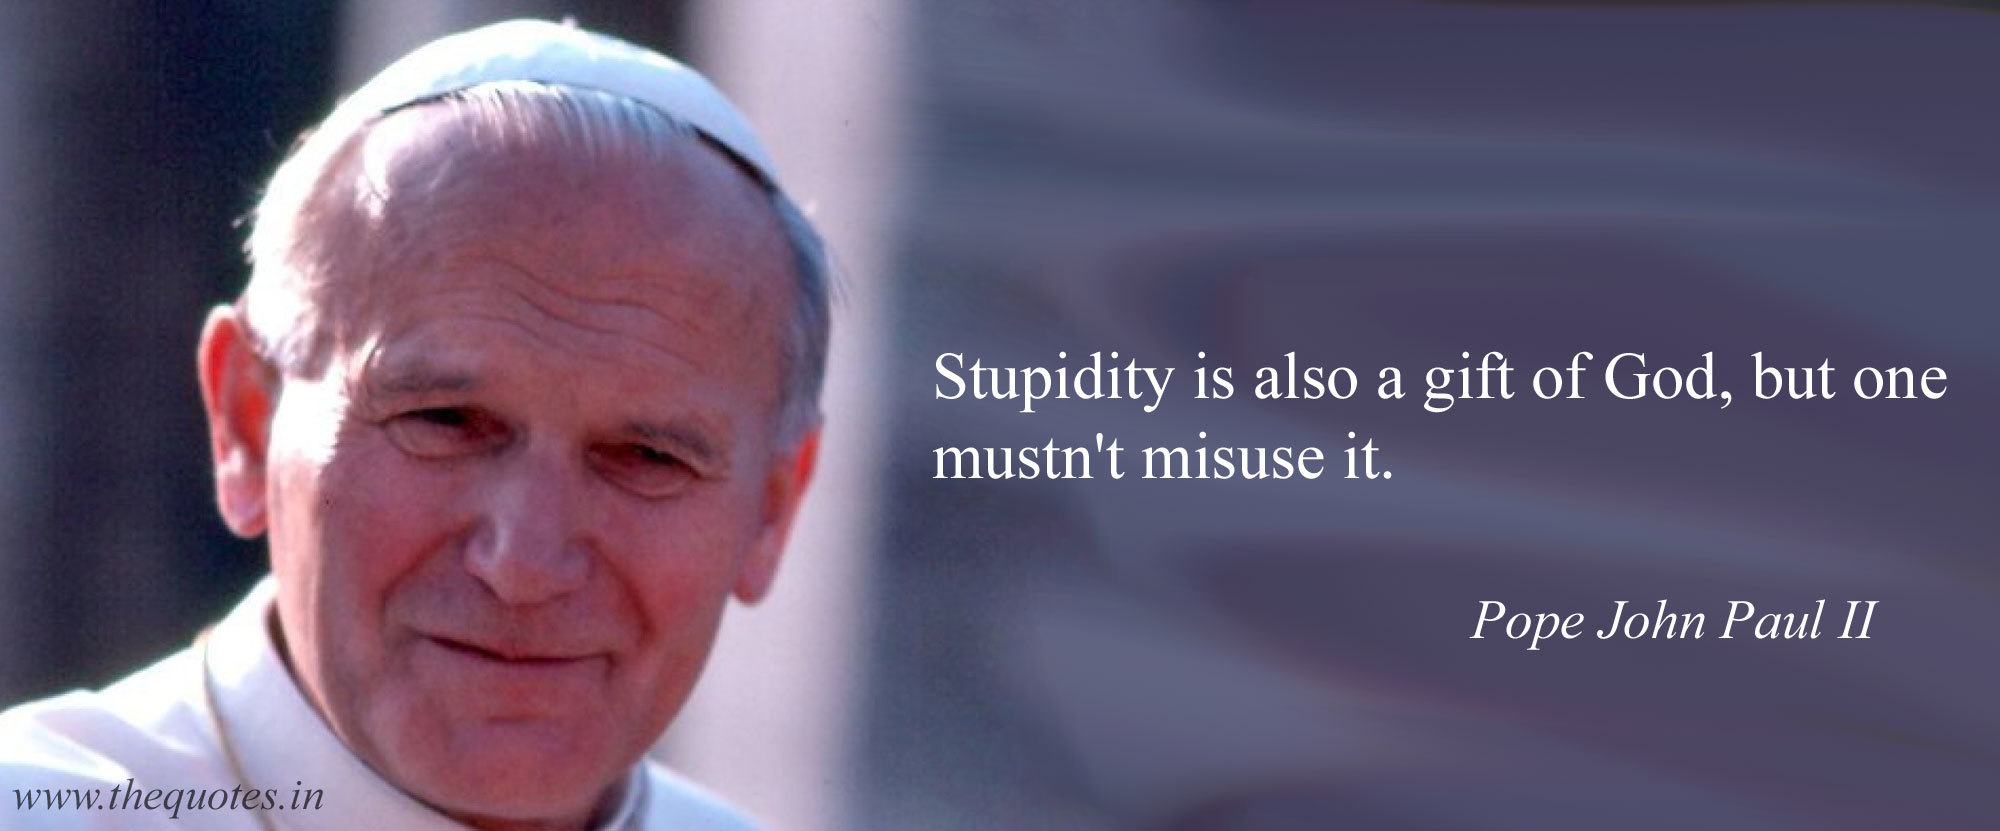 Click image for larger version  Name:	Pope-John-Paul-II-Quotes-4.jpg Views:	0 Size:	142,3 kB ID:	1811603